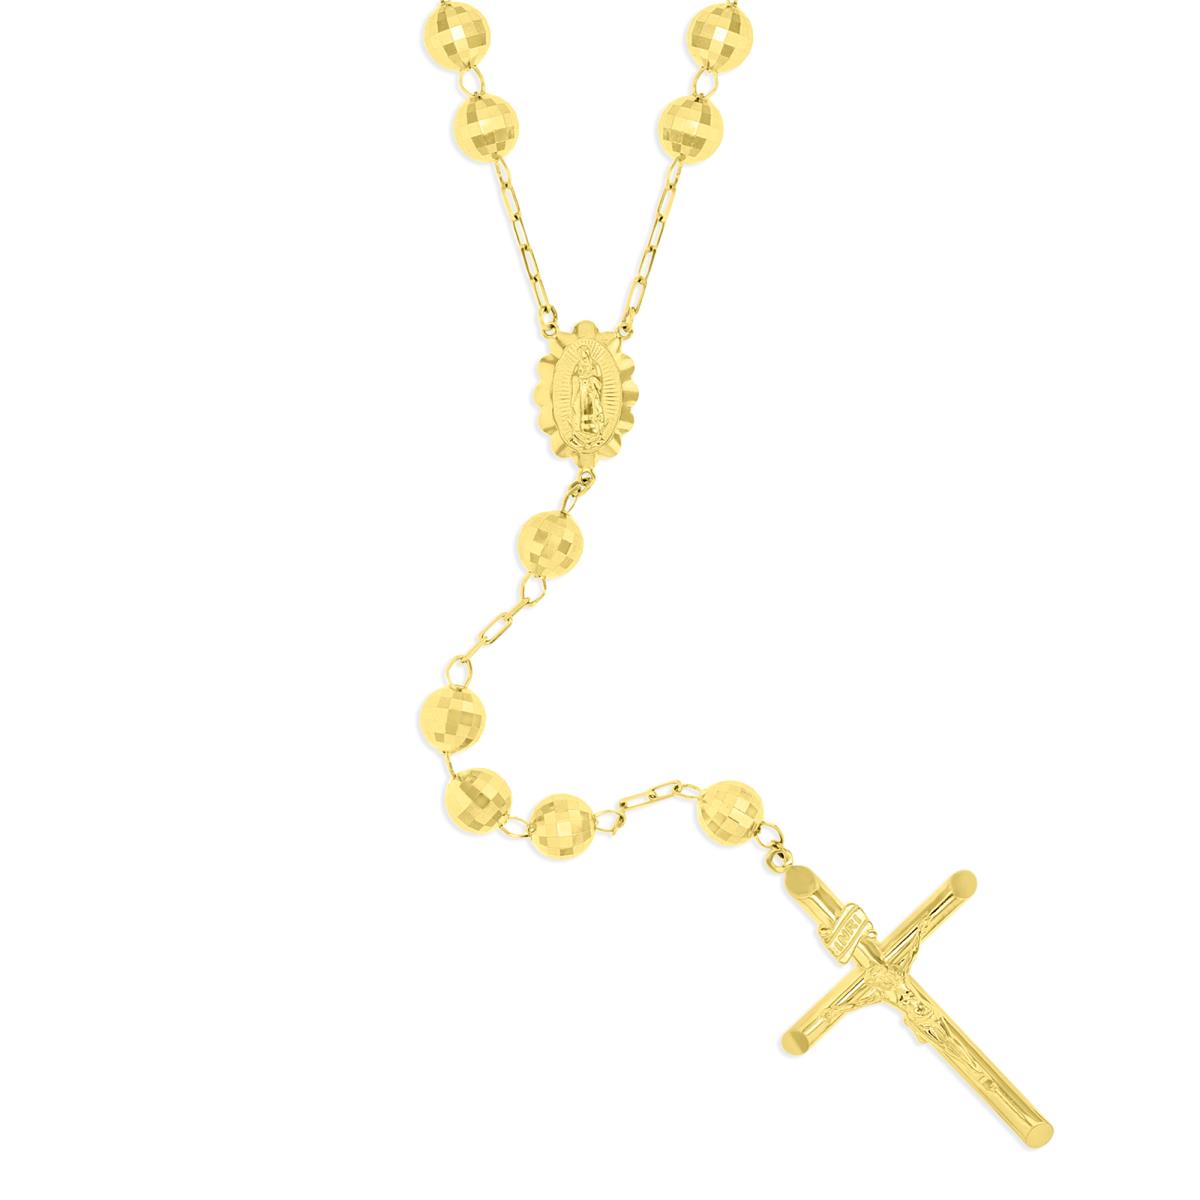 14K Gold Yellow 8MM Diamond Cut Beads Rosary 28" Necklace